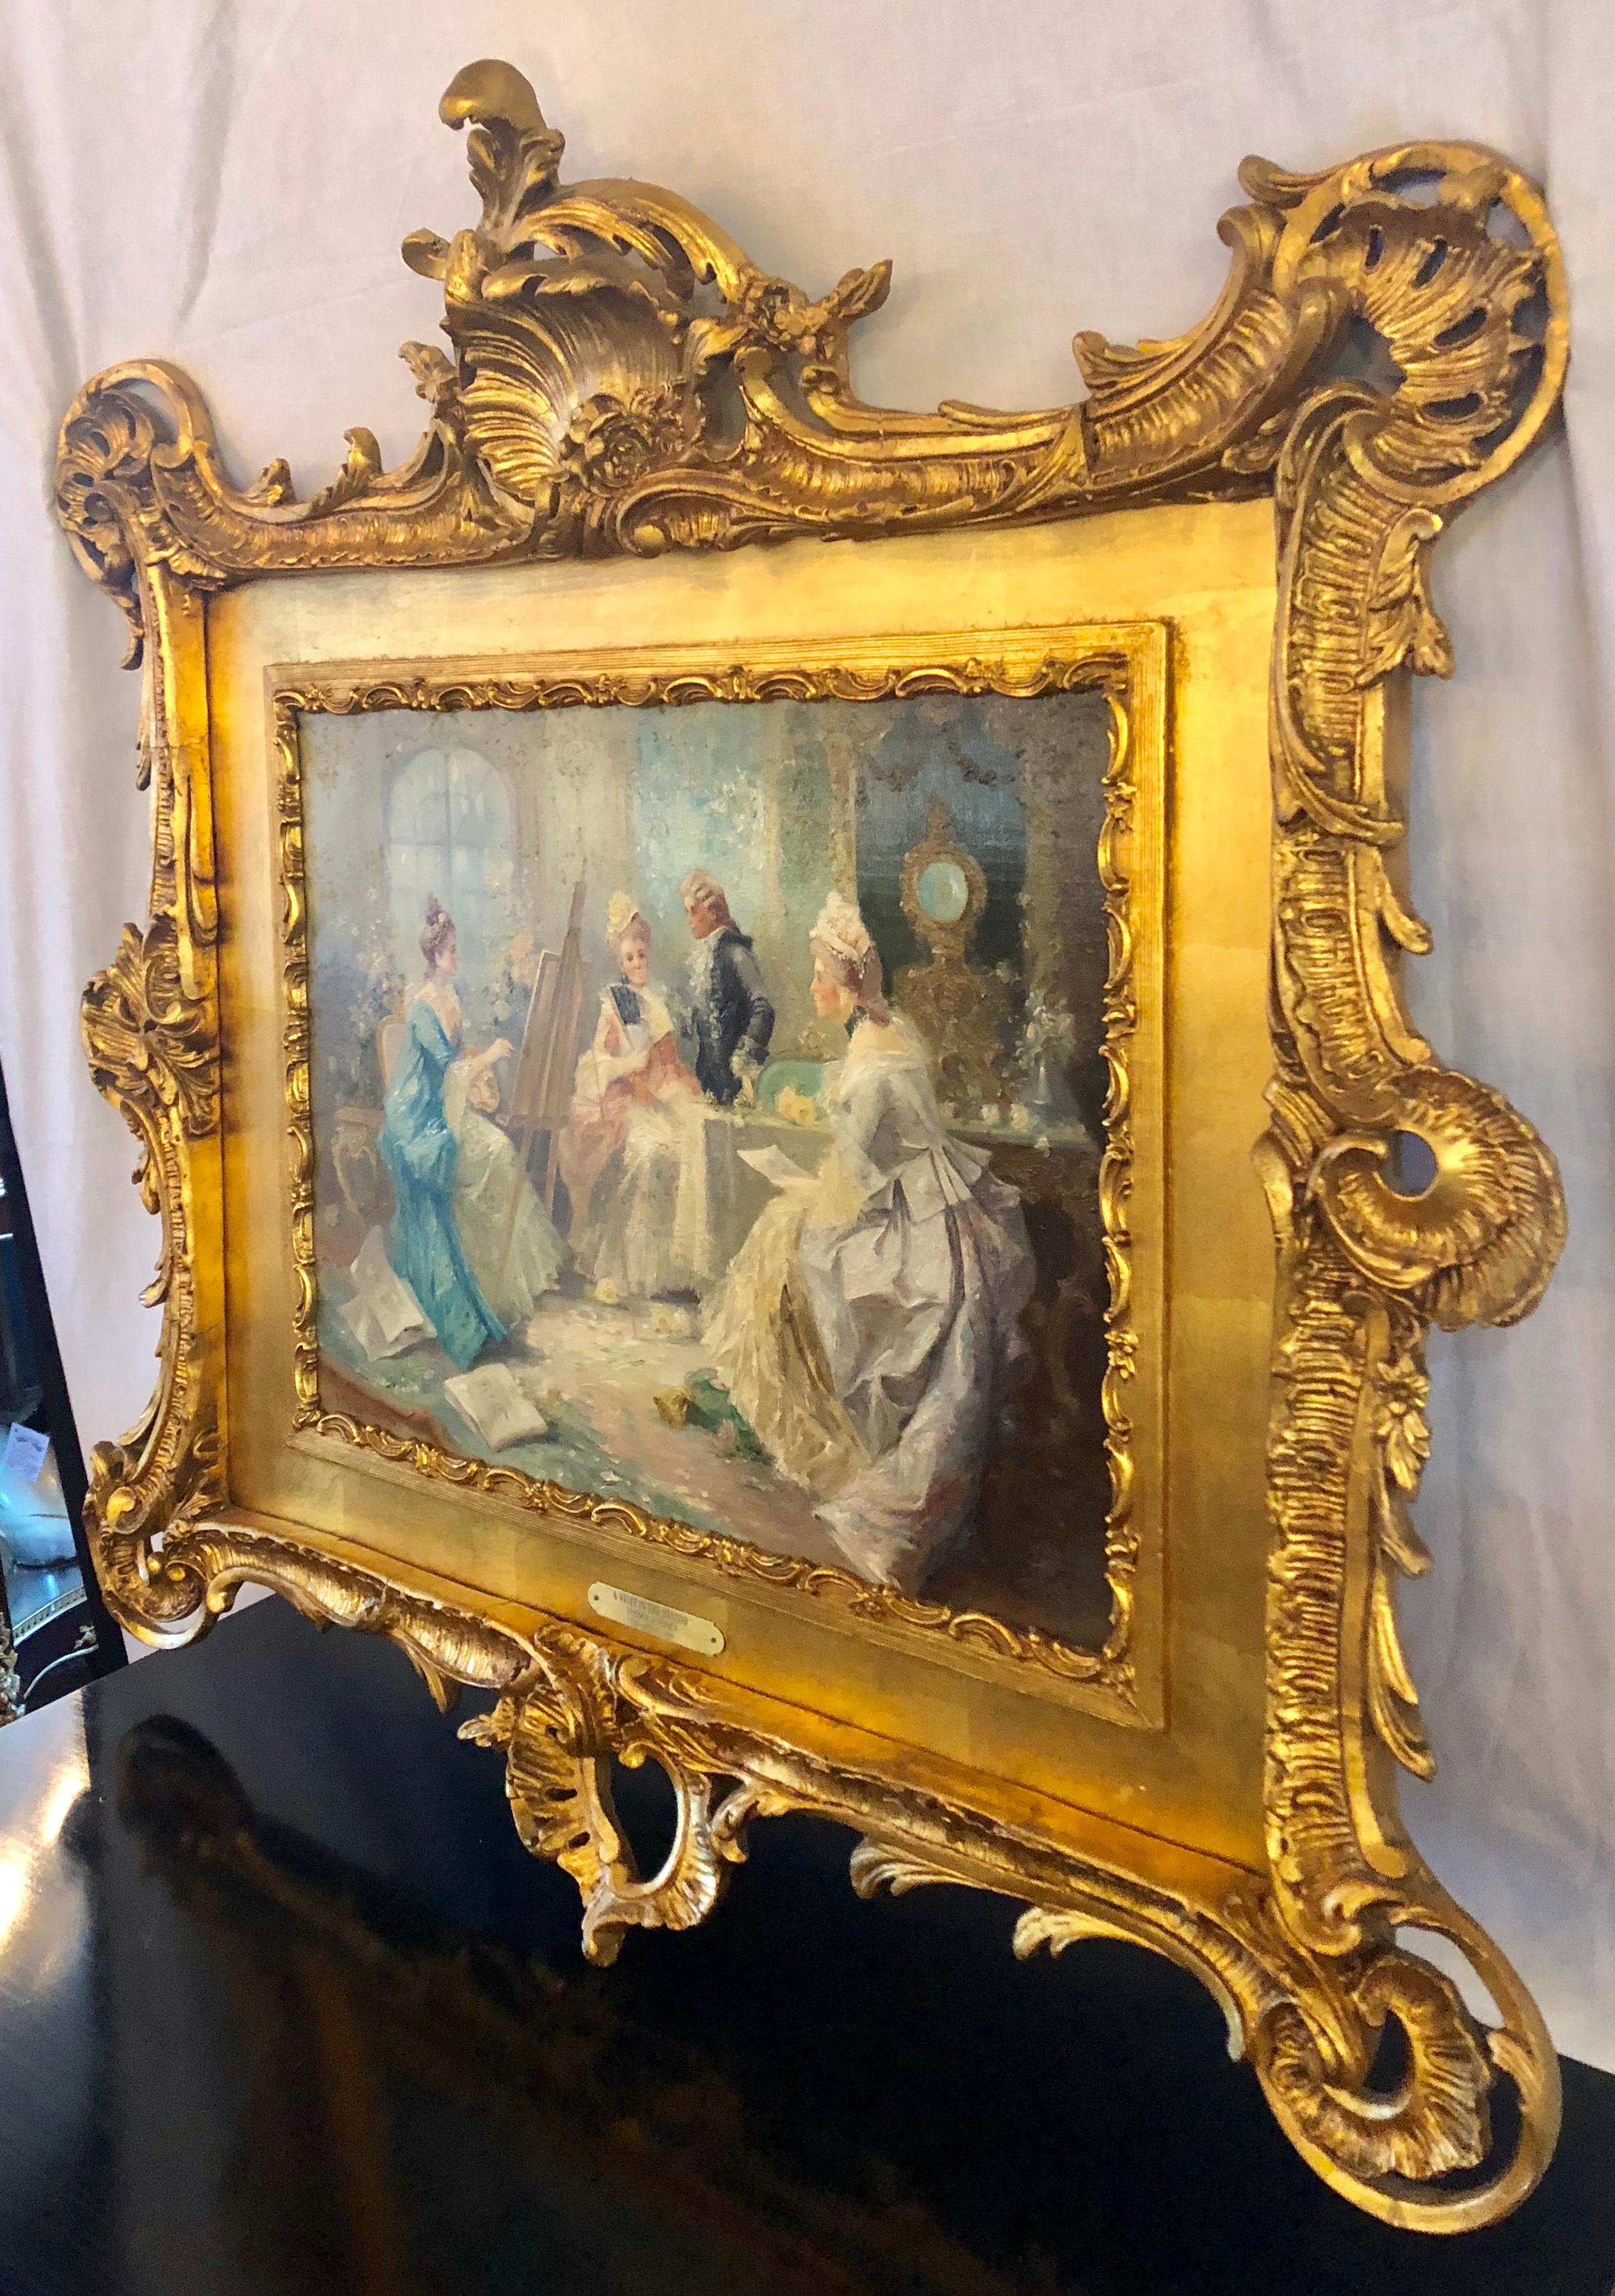 Impressionistic oil on board signed E Dorie Teissier titled 'A Visit in The Studio'. This wonderfully detailed and well thought out piece of art is set in the most spectacular gilt gold carved wooden frame anyone could ever ask for. The frame